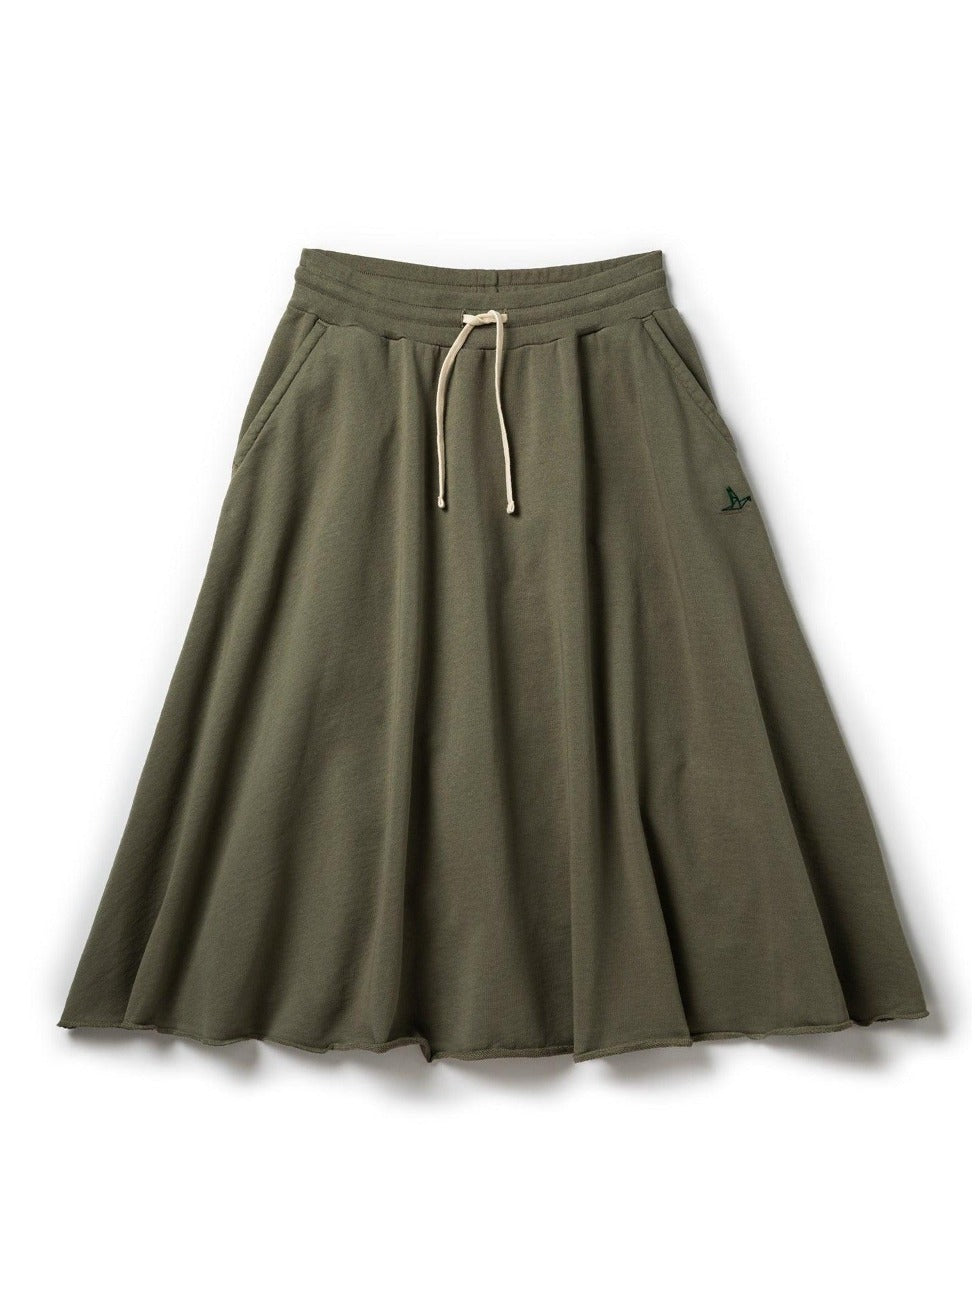 Terry Skirt - Olive - ORILABO Project